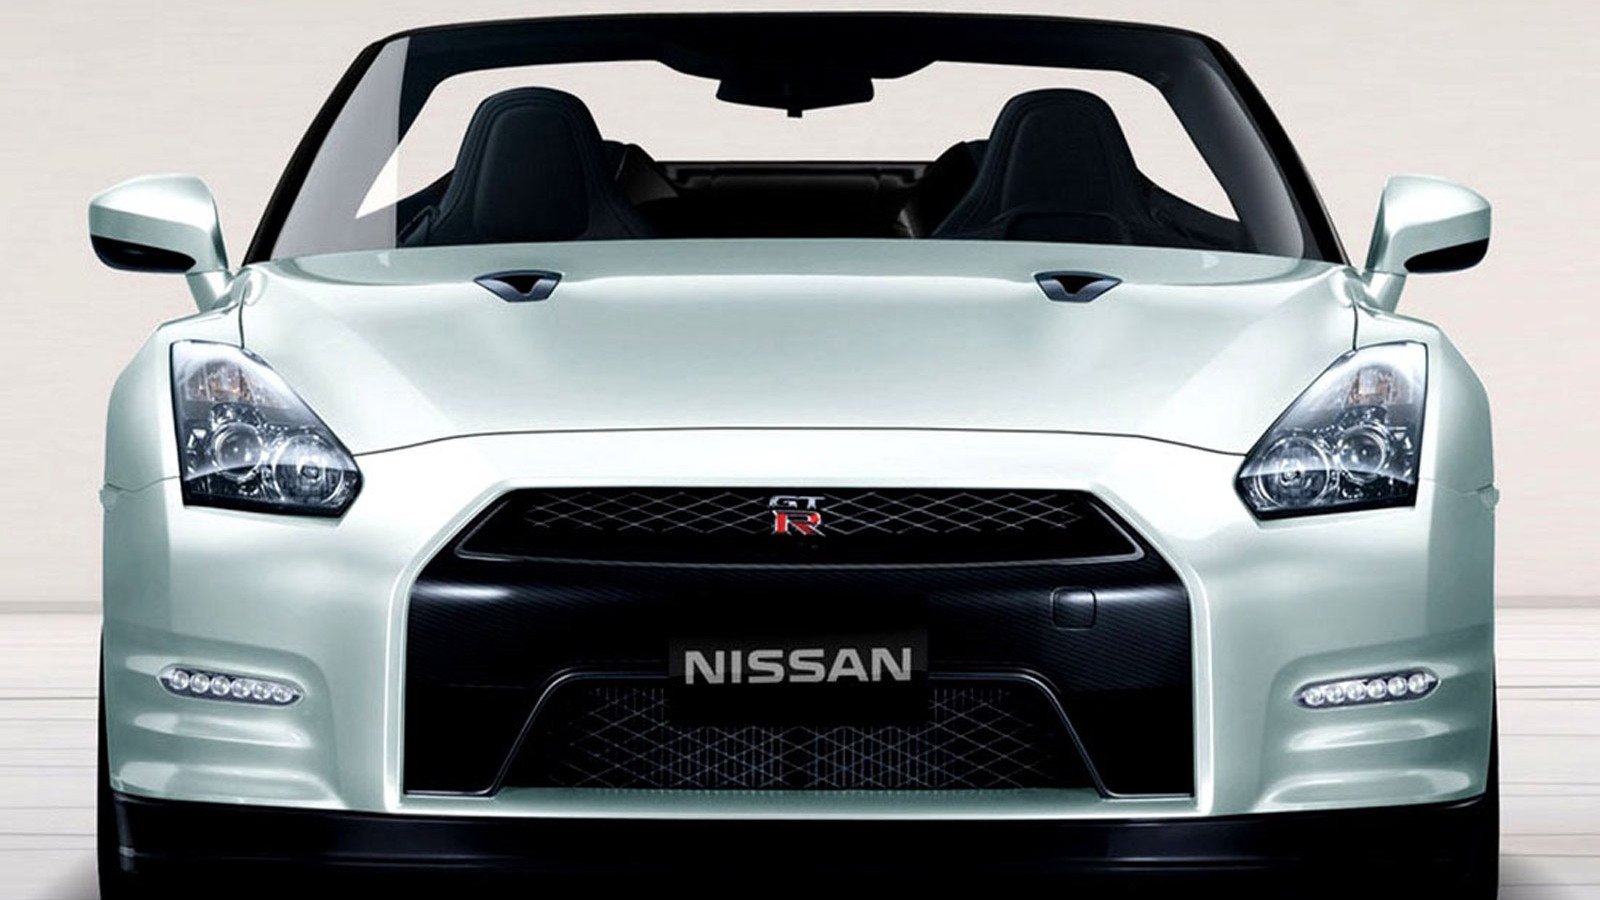 R35 Nissan GT-R convertible by Newport Convertible Engineering